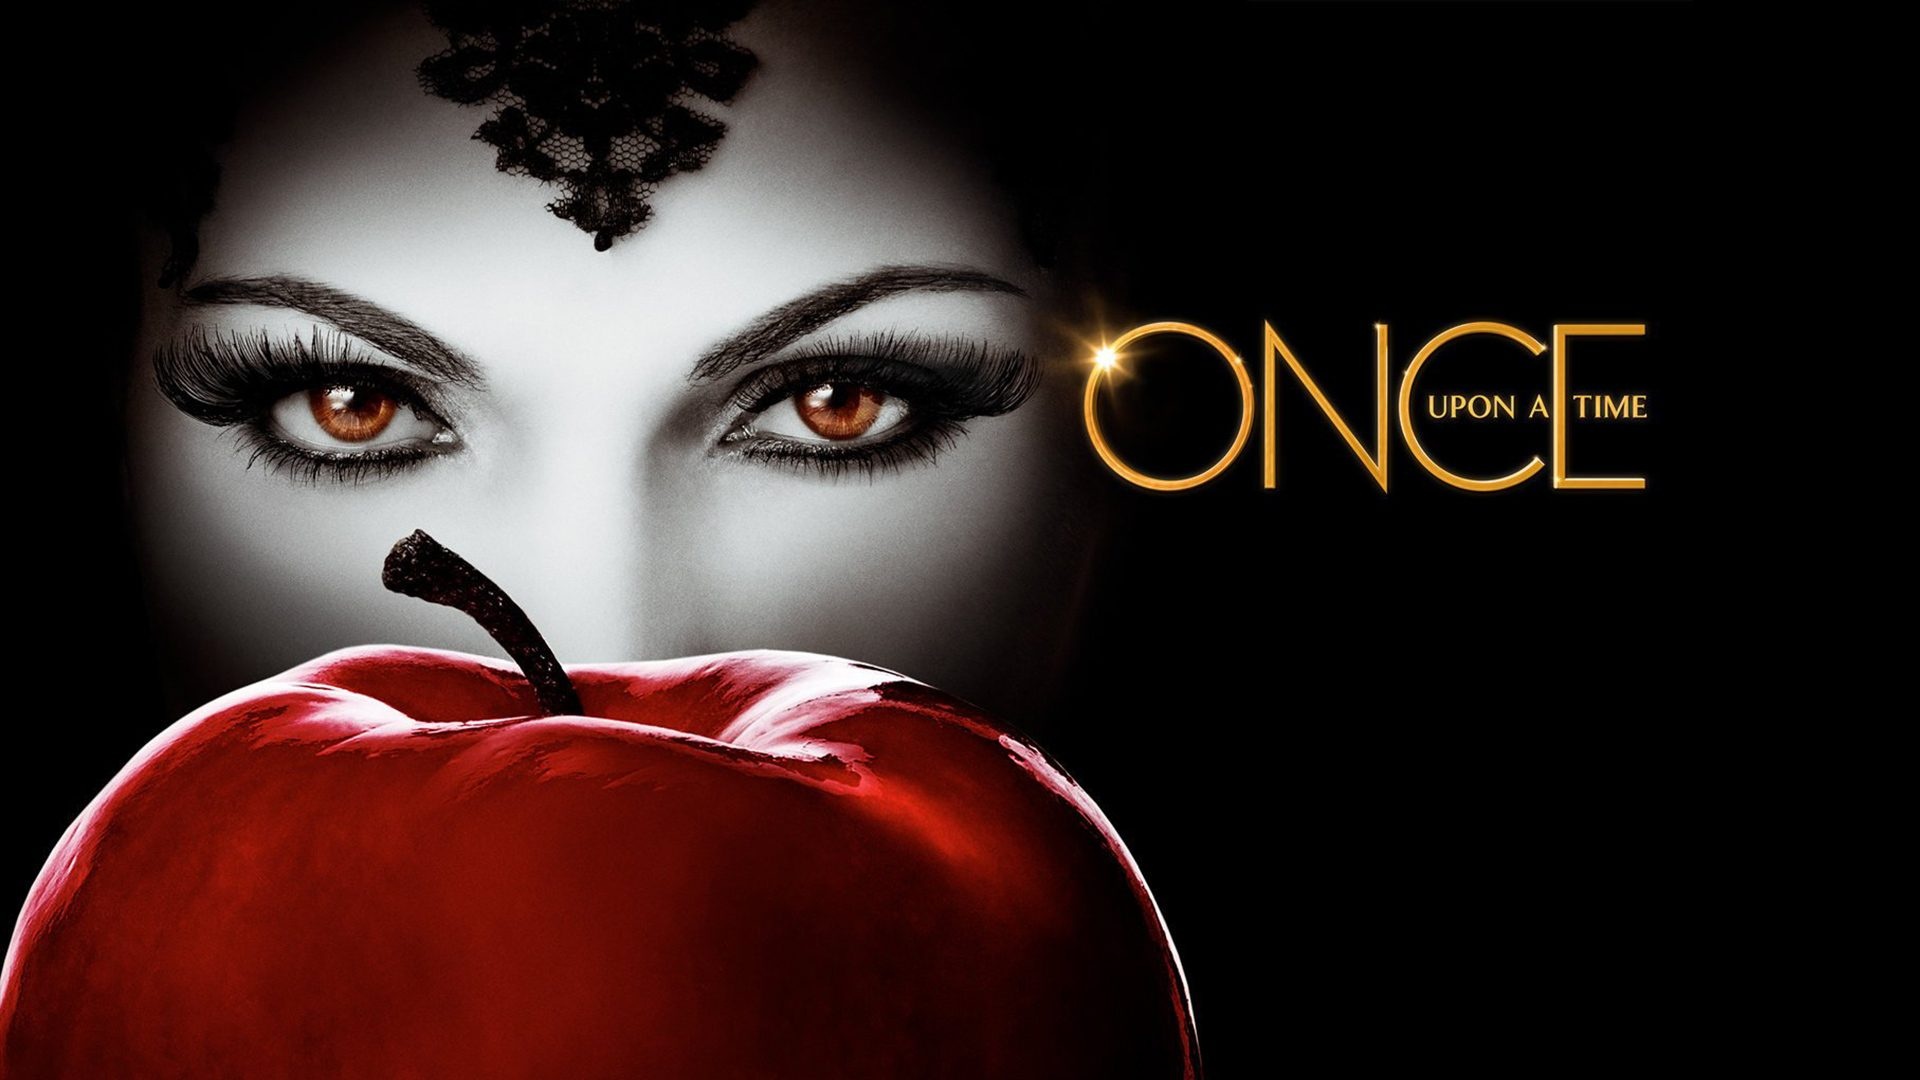 Once Upon a Time TV Series, Once Upon a Time season 3, 1920x1080 Full HD Desktop